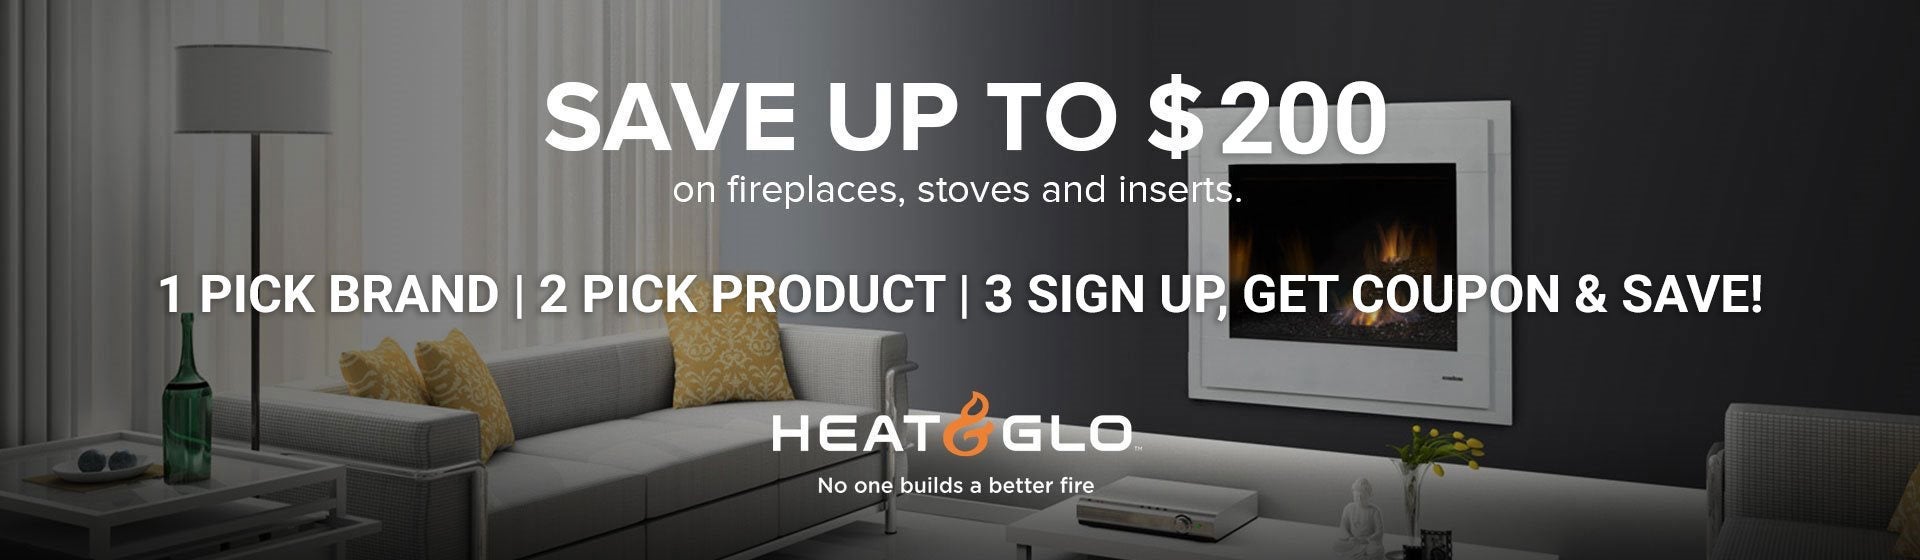 Save up to $200 on fireplaces, stoves and inserts